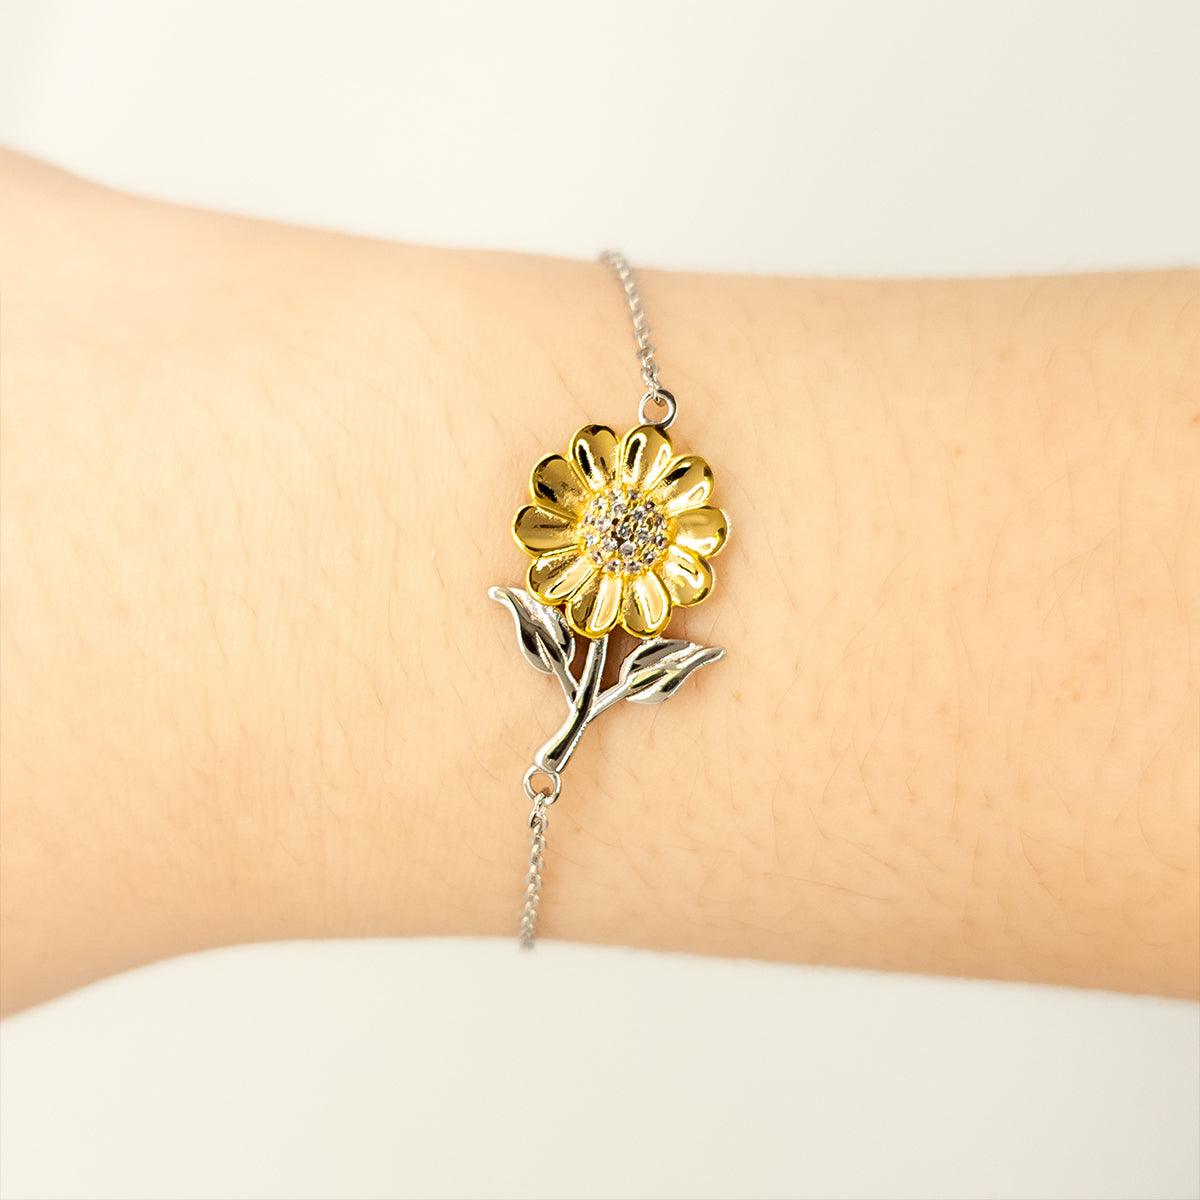 Sarcastic Missionary Sunflower Bracelet Gifts, Christmas Holiday Gifts for Missionary Birthday Message Card, Missionary: Because greatness is woven into the fabric of every day, Coworkers, Friends - Mallard Moon Gift Shop